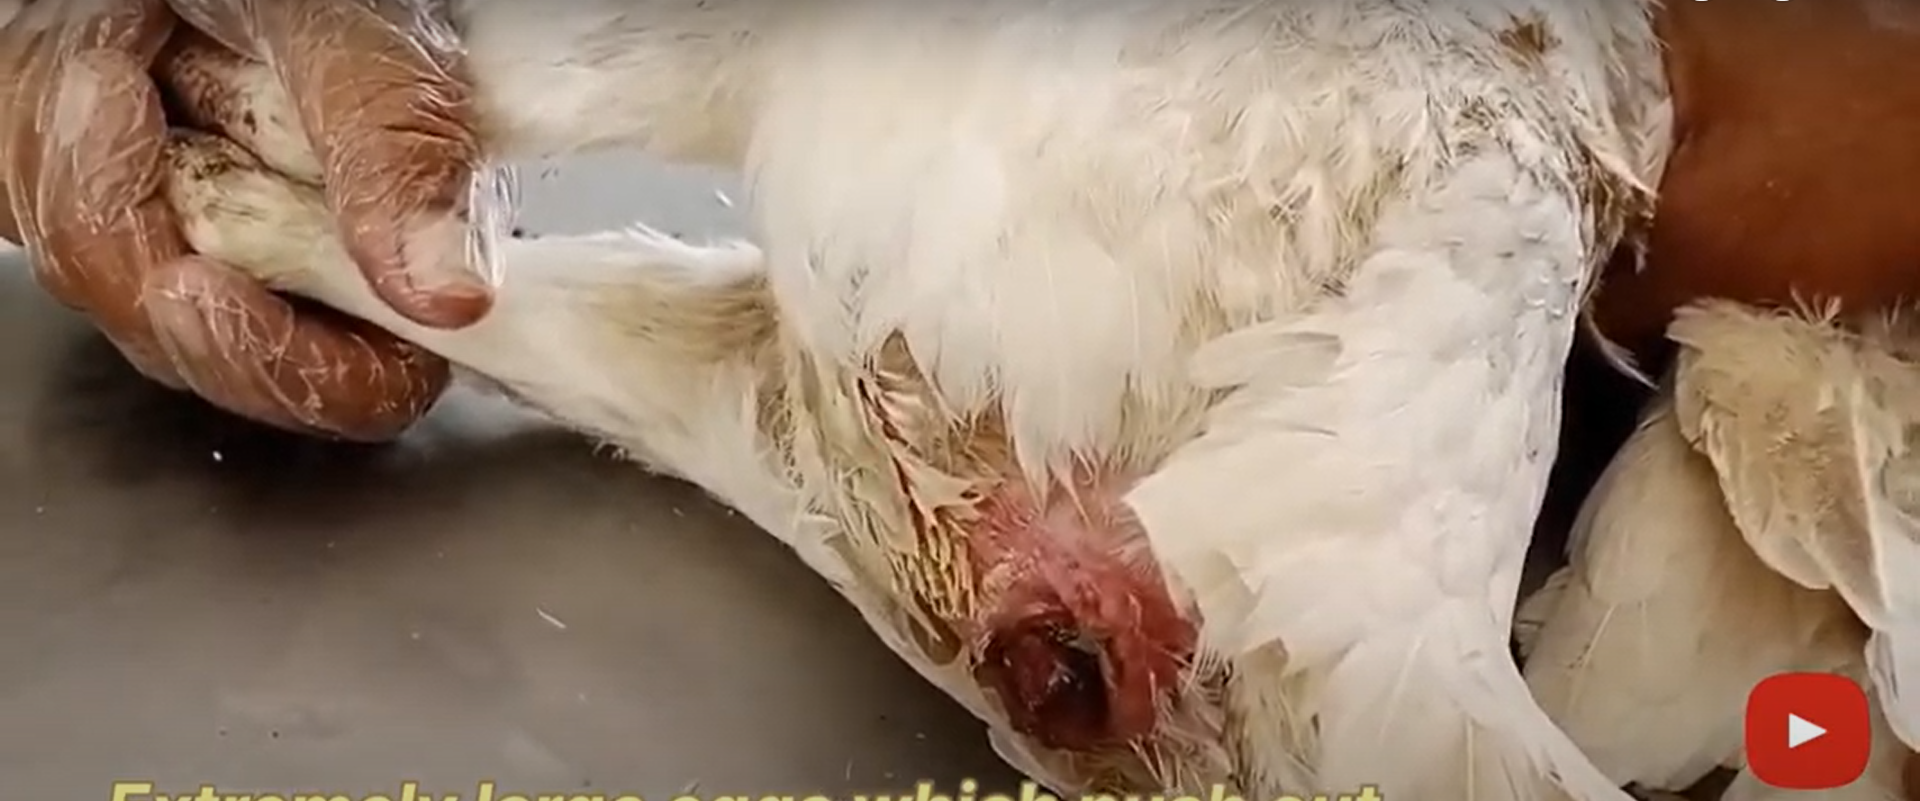 chicken vent prolapse cause and treatment